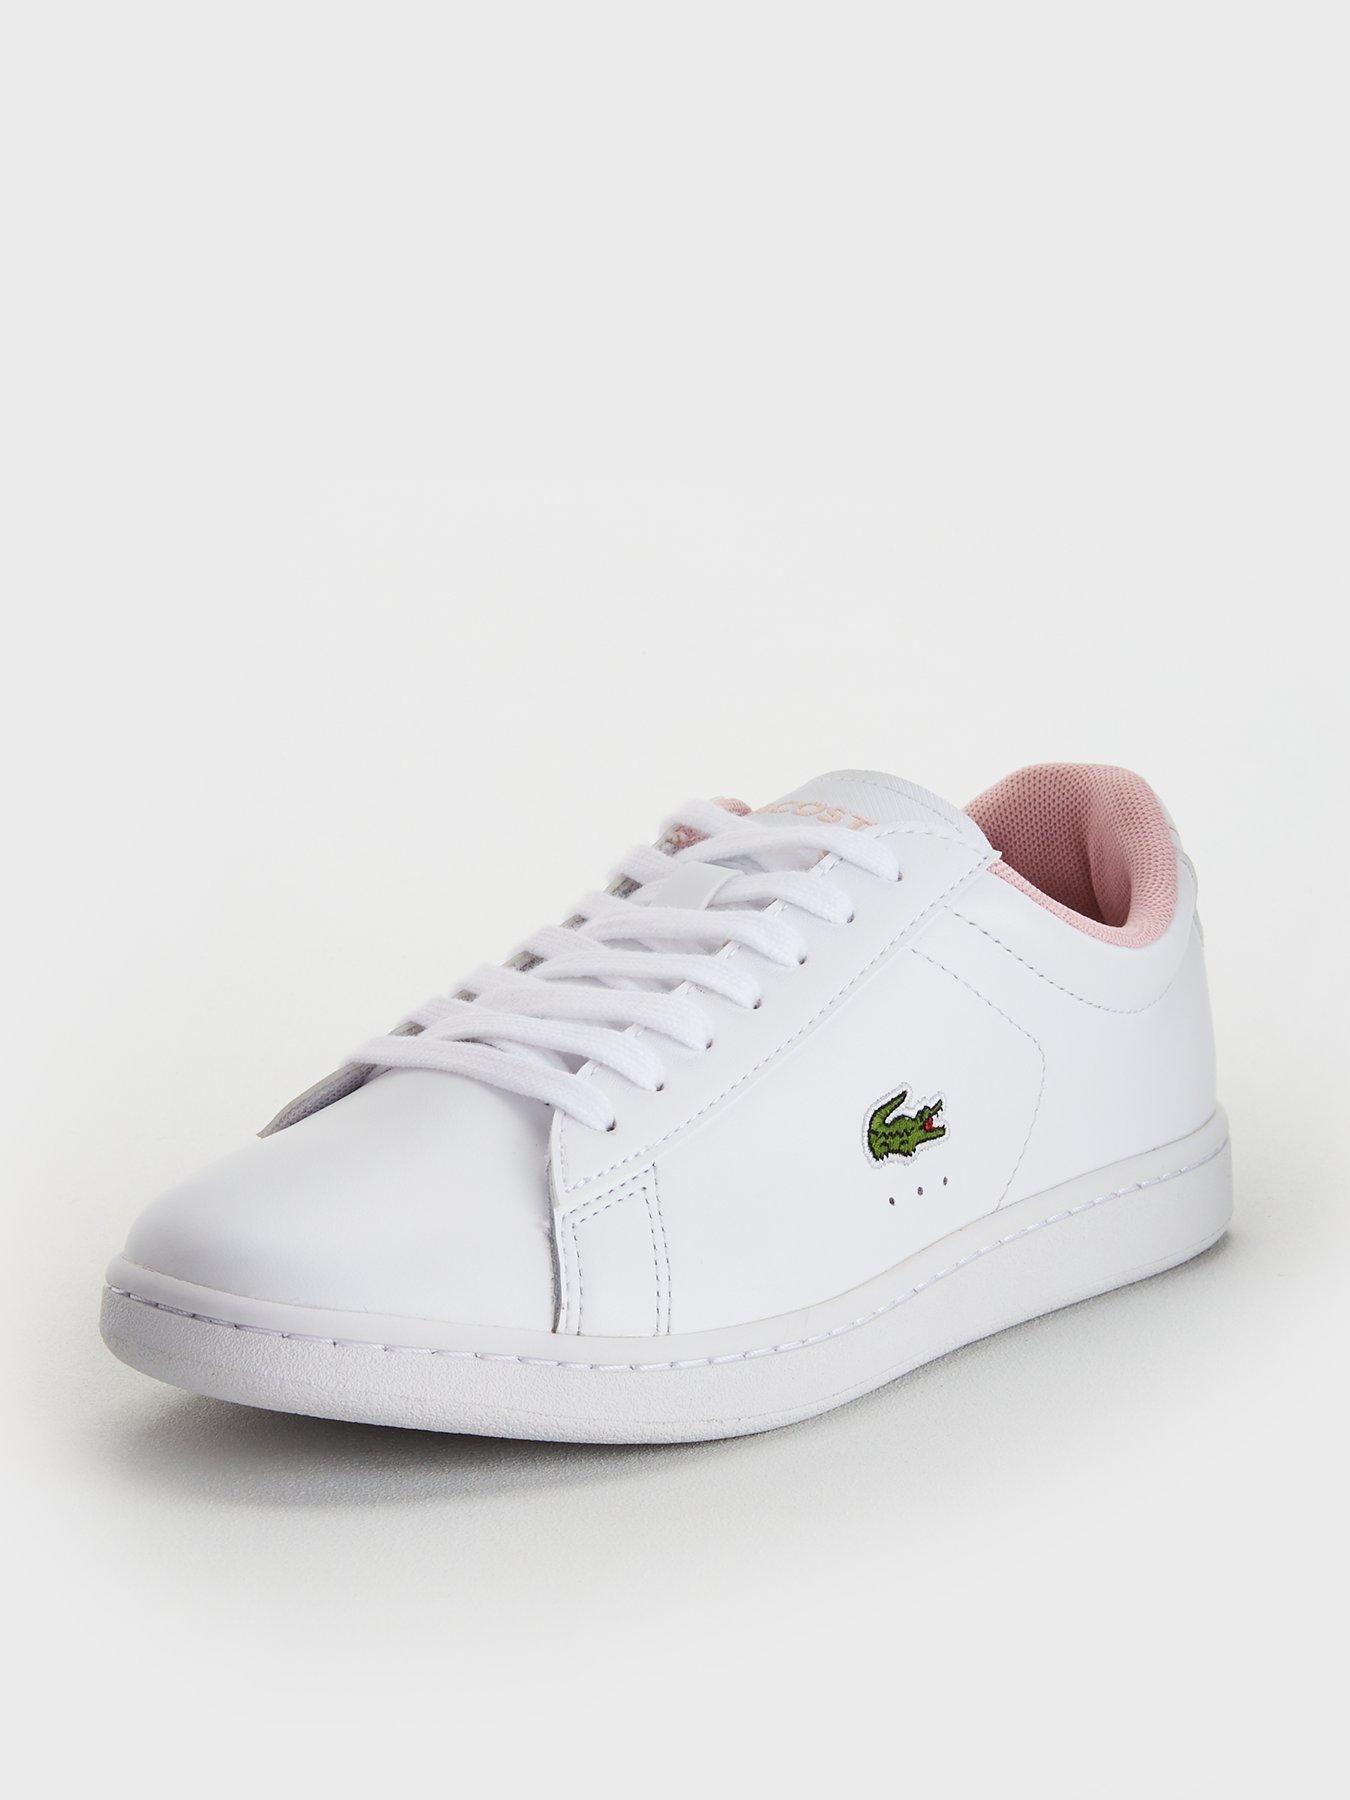 cheap womens lacoste trainers